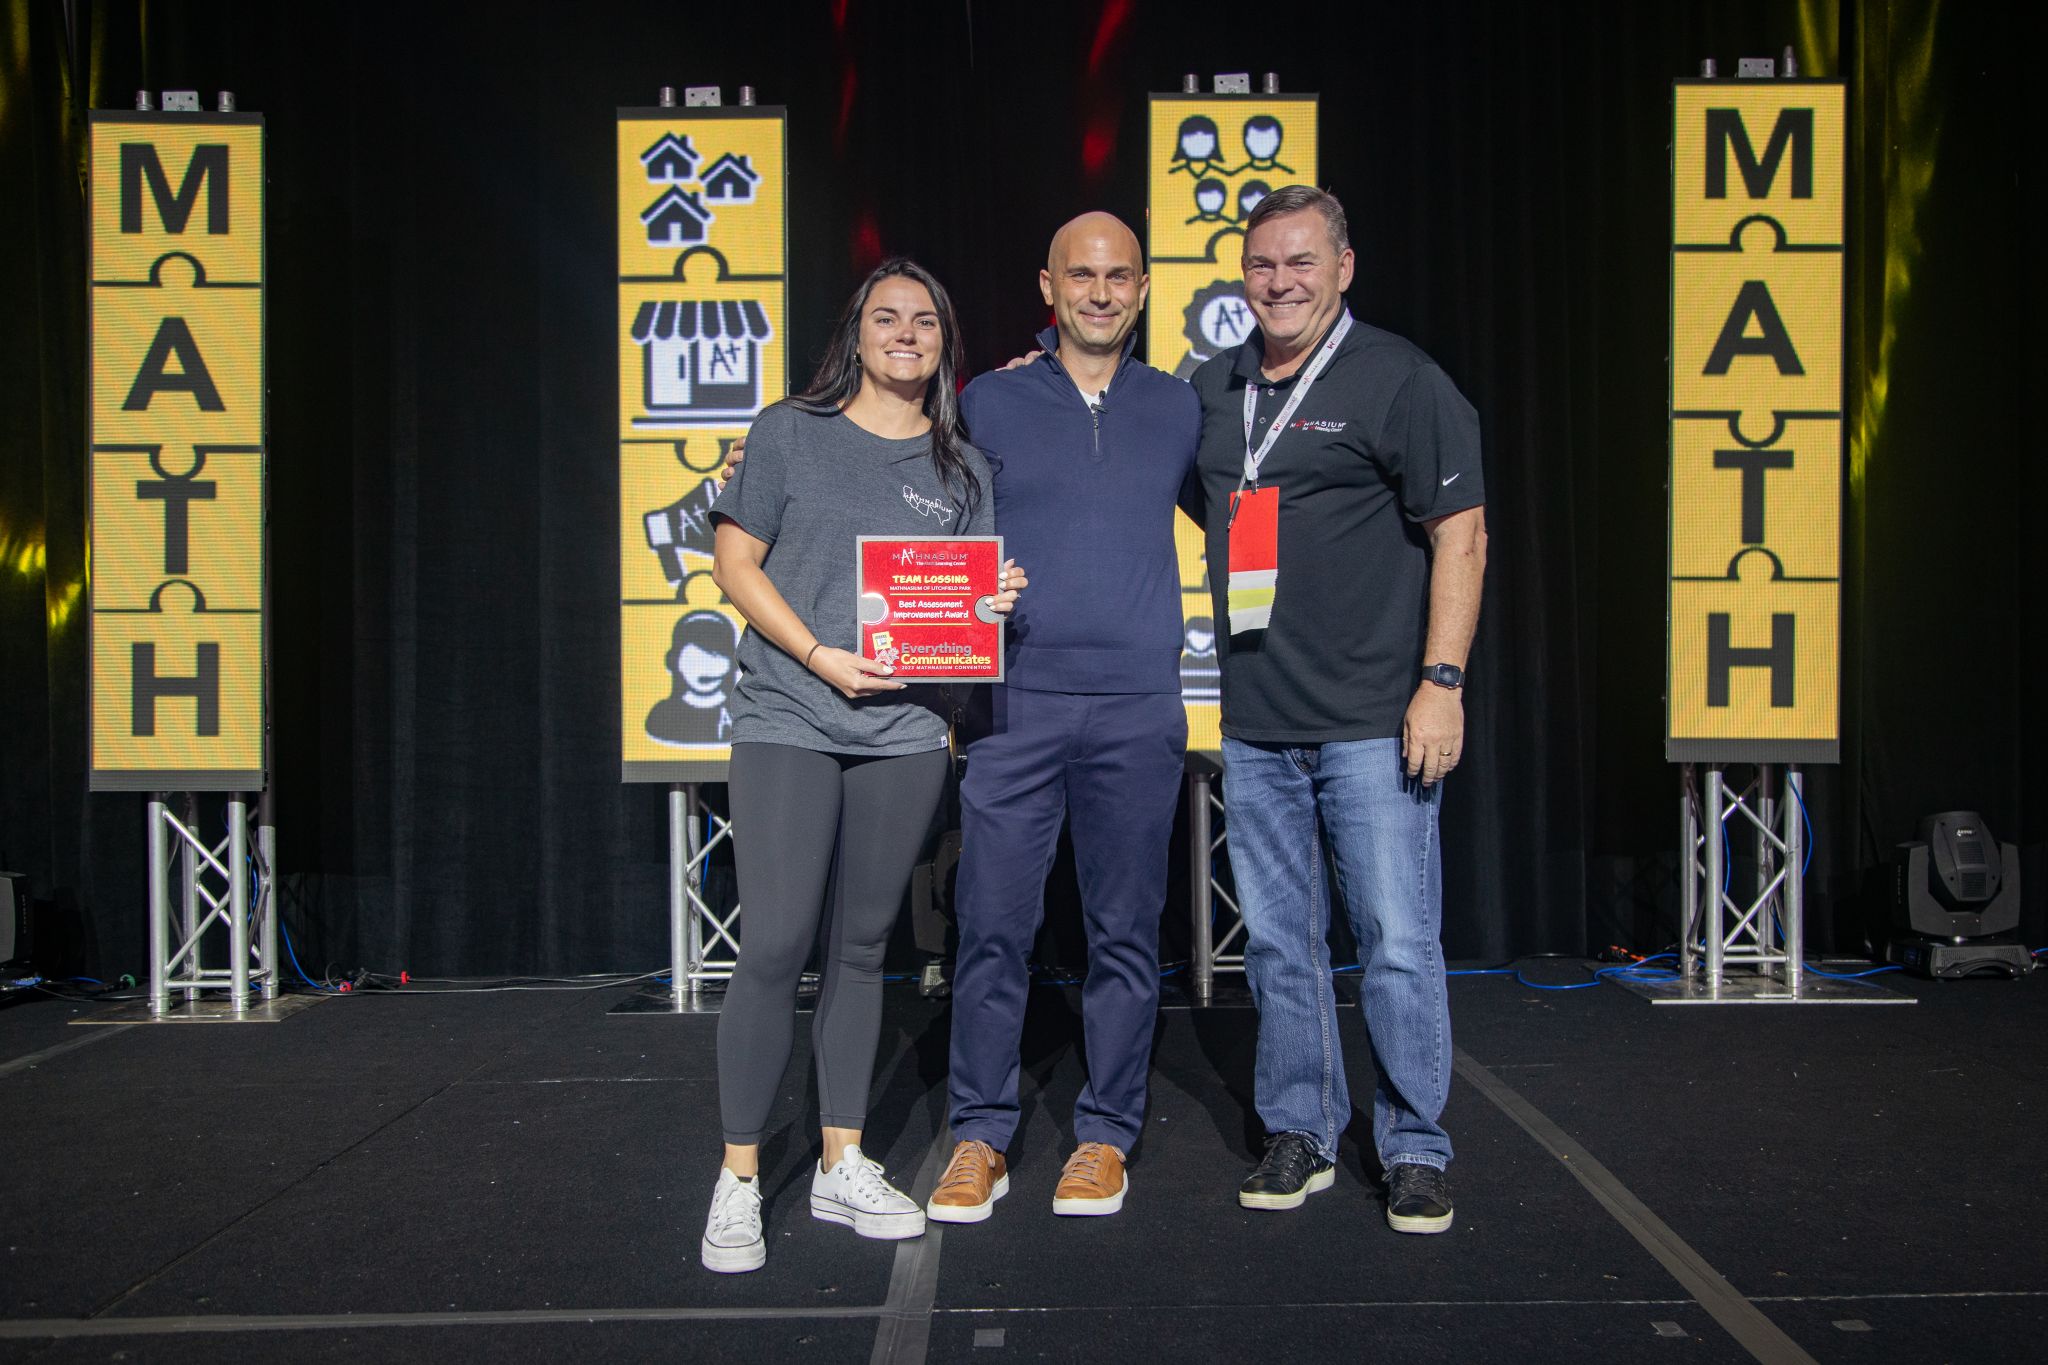 Mathnasium of Litchfield Park and Goodyear Awarded the Highest Education Honor at the 2023 Mathnasium Convention